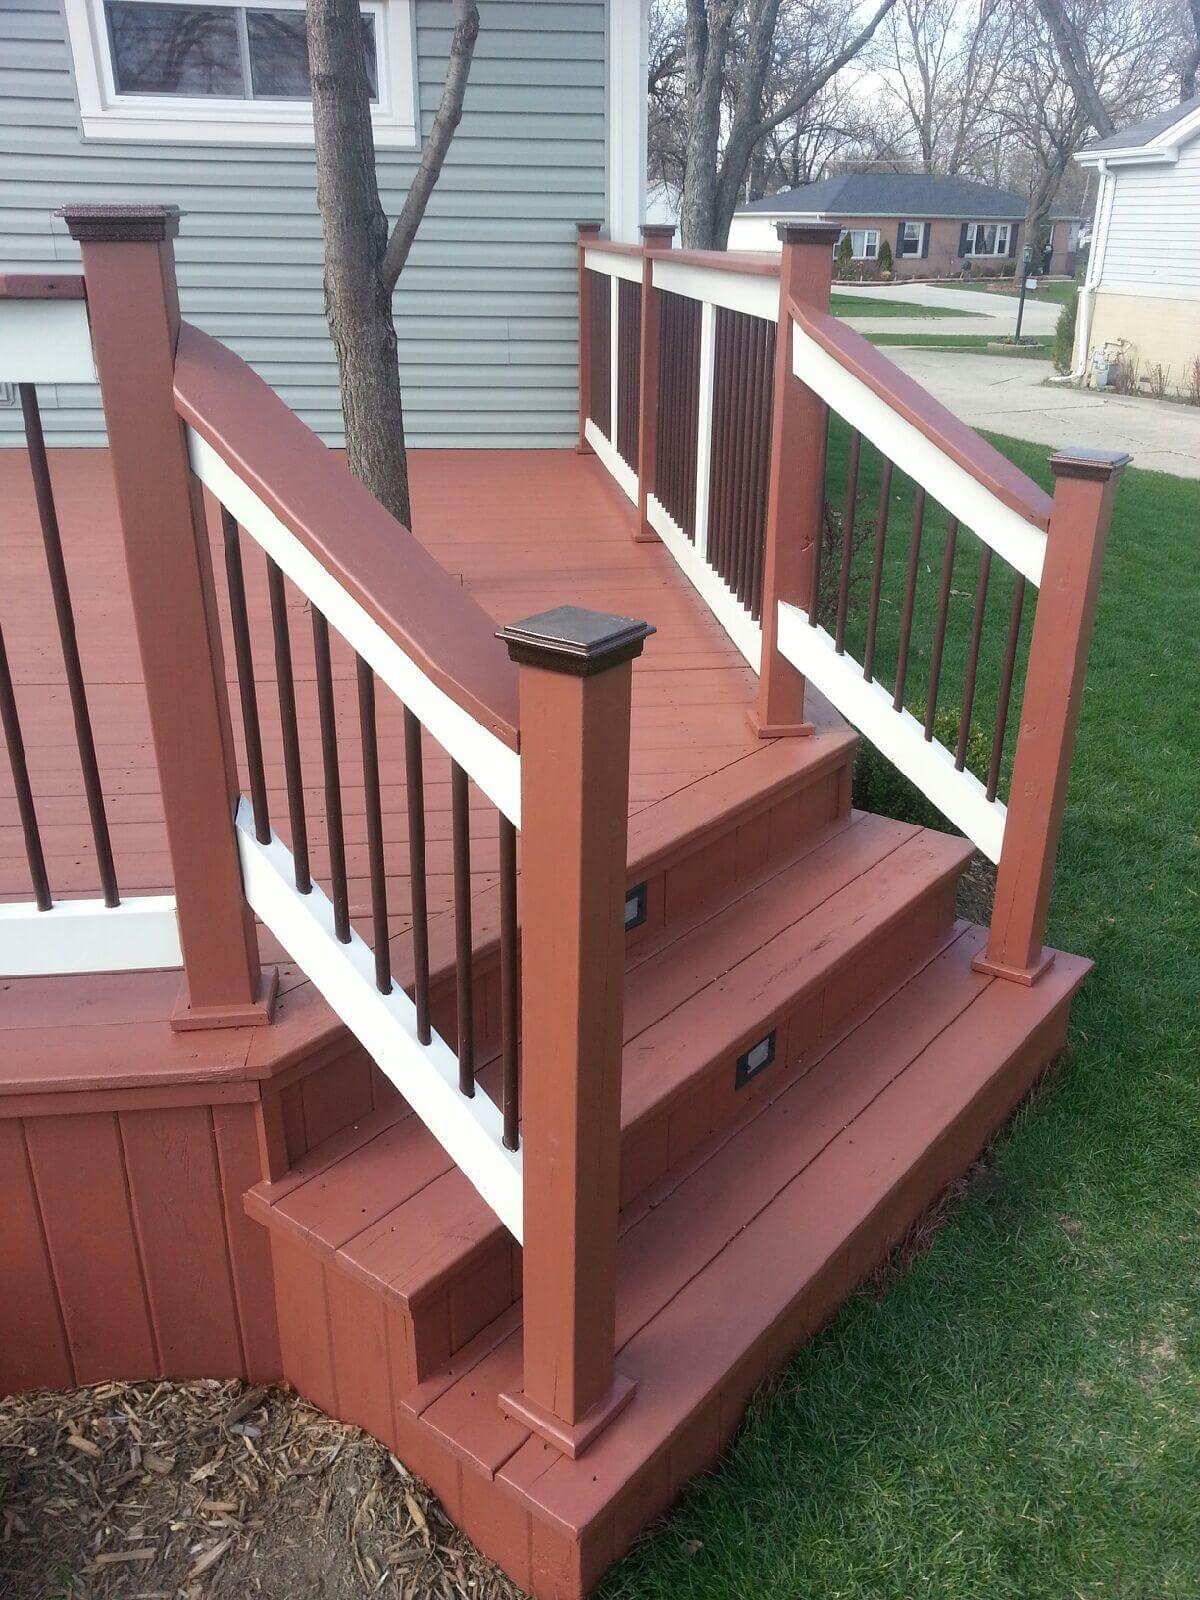 Repairs and maintenance for your deck, fence, and exterior wood staining. - Deck Staining Oak Brook - Deck Cleaning Services